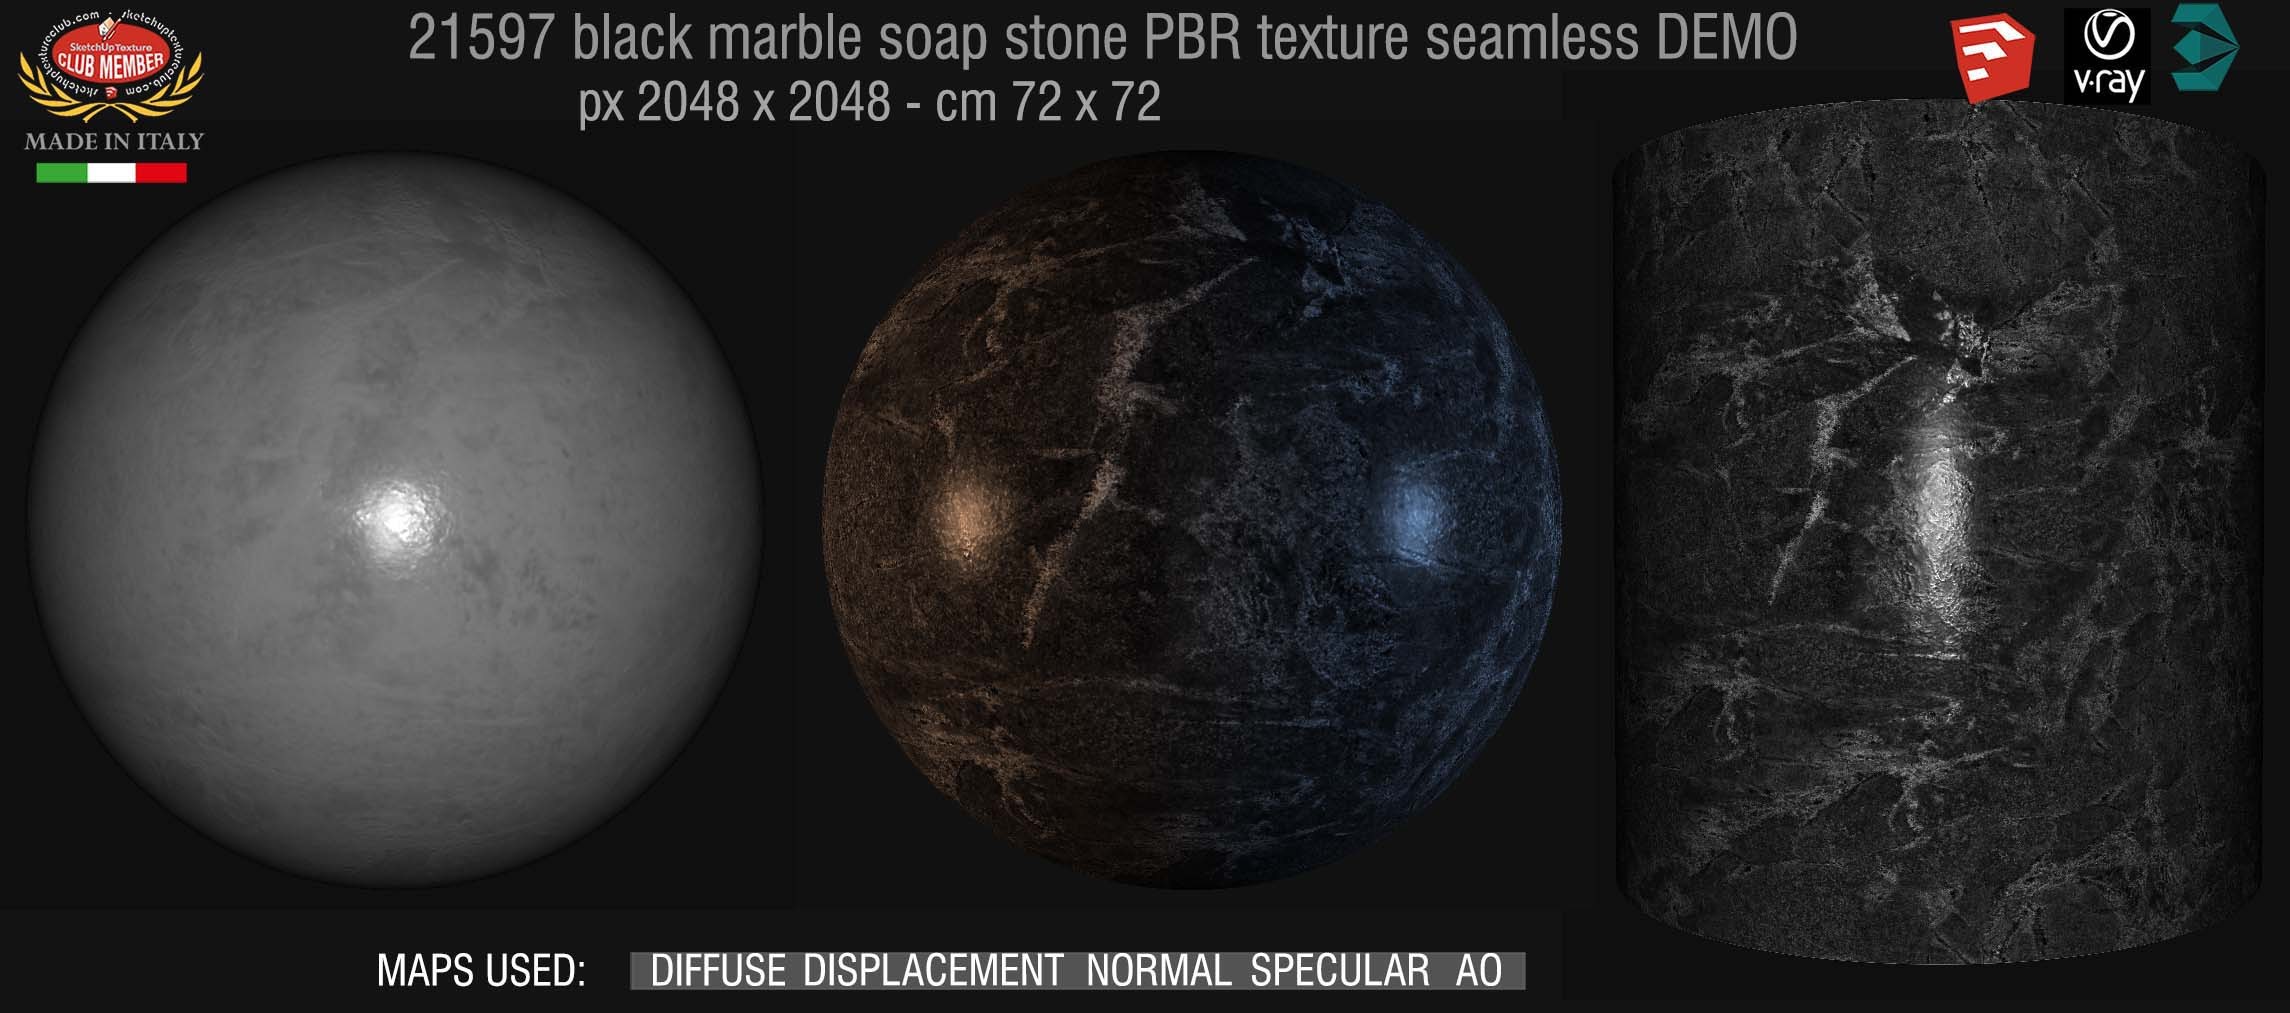 21597 black marble soap stone PBR texture seamless DEMO